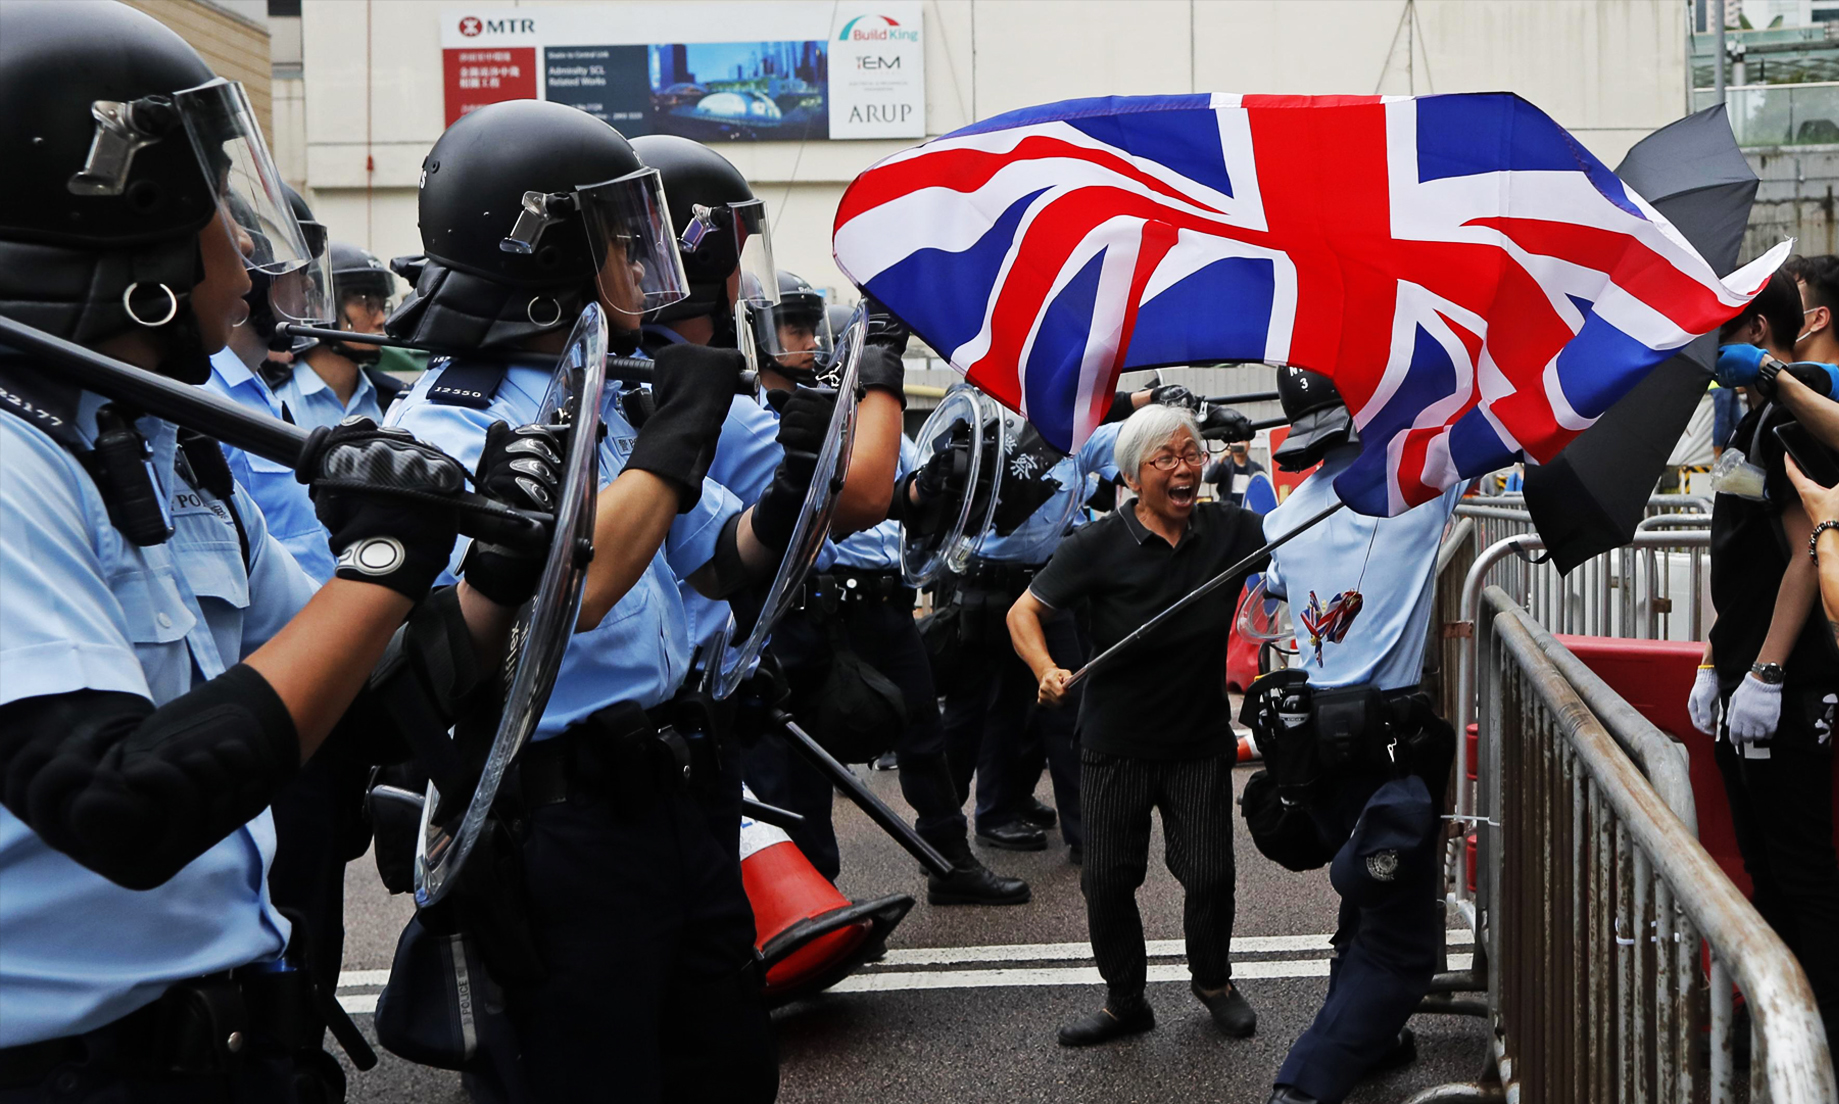 Hong Kong riot police clash with protesters at airport